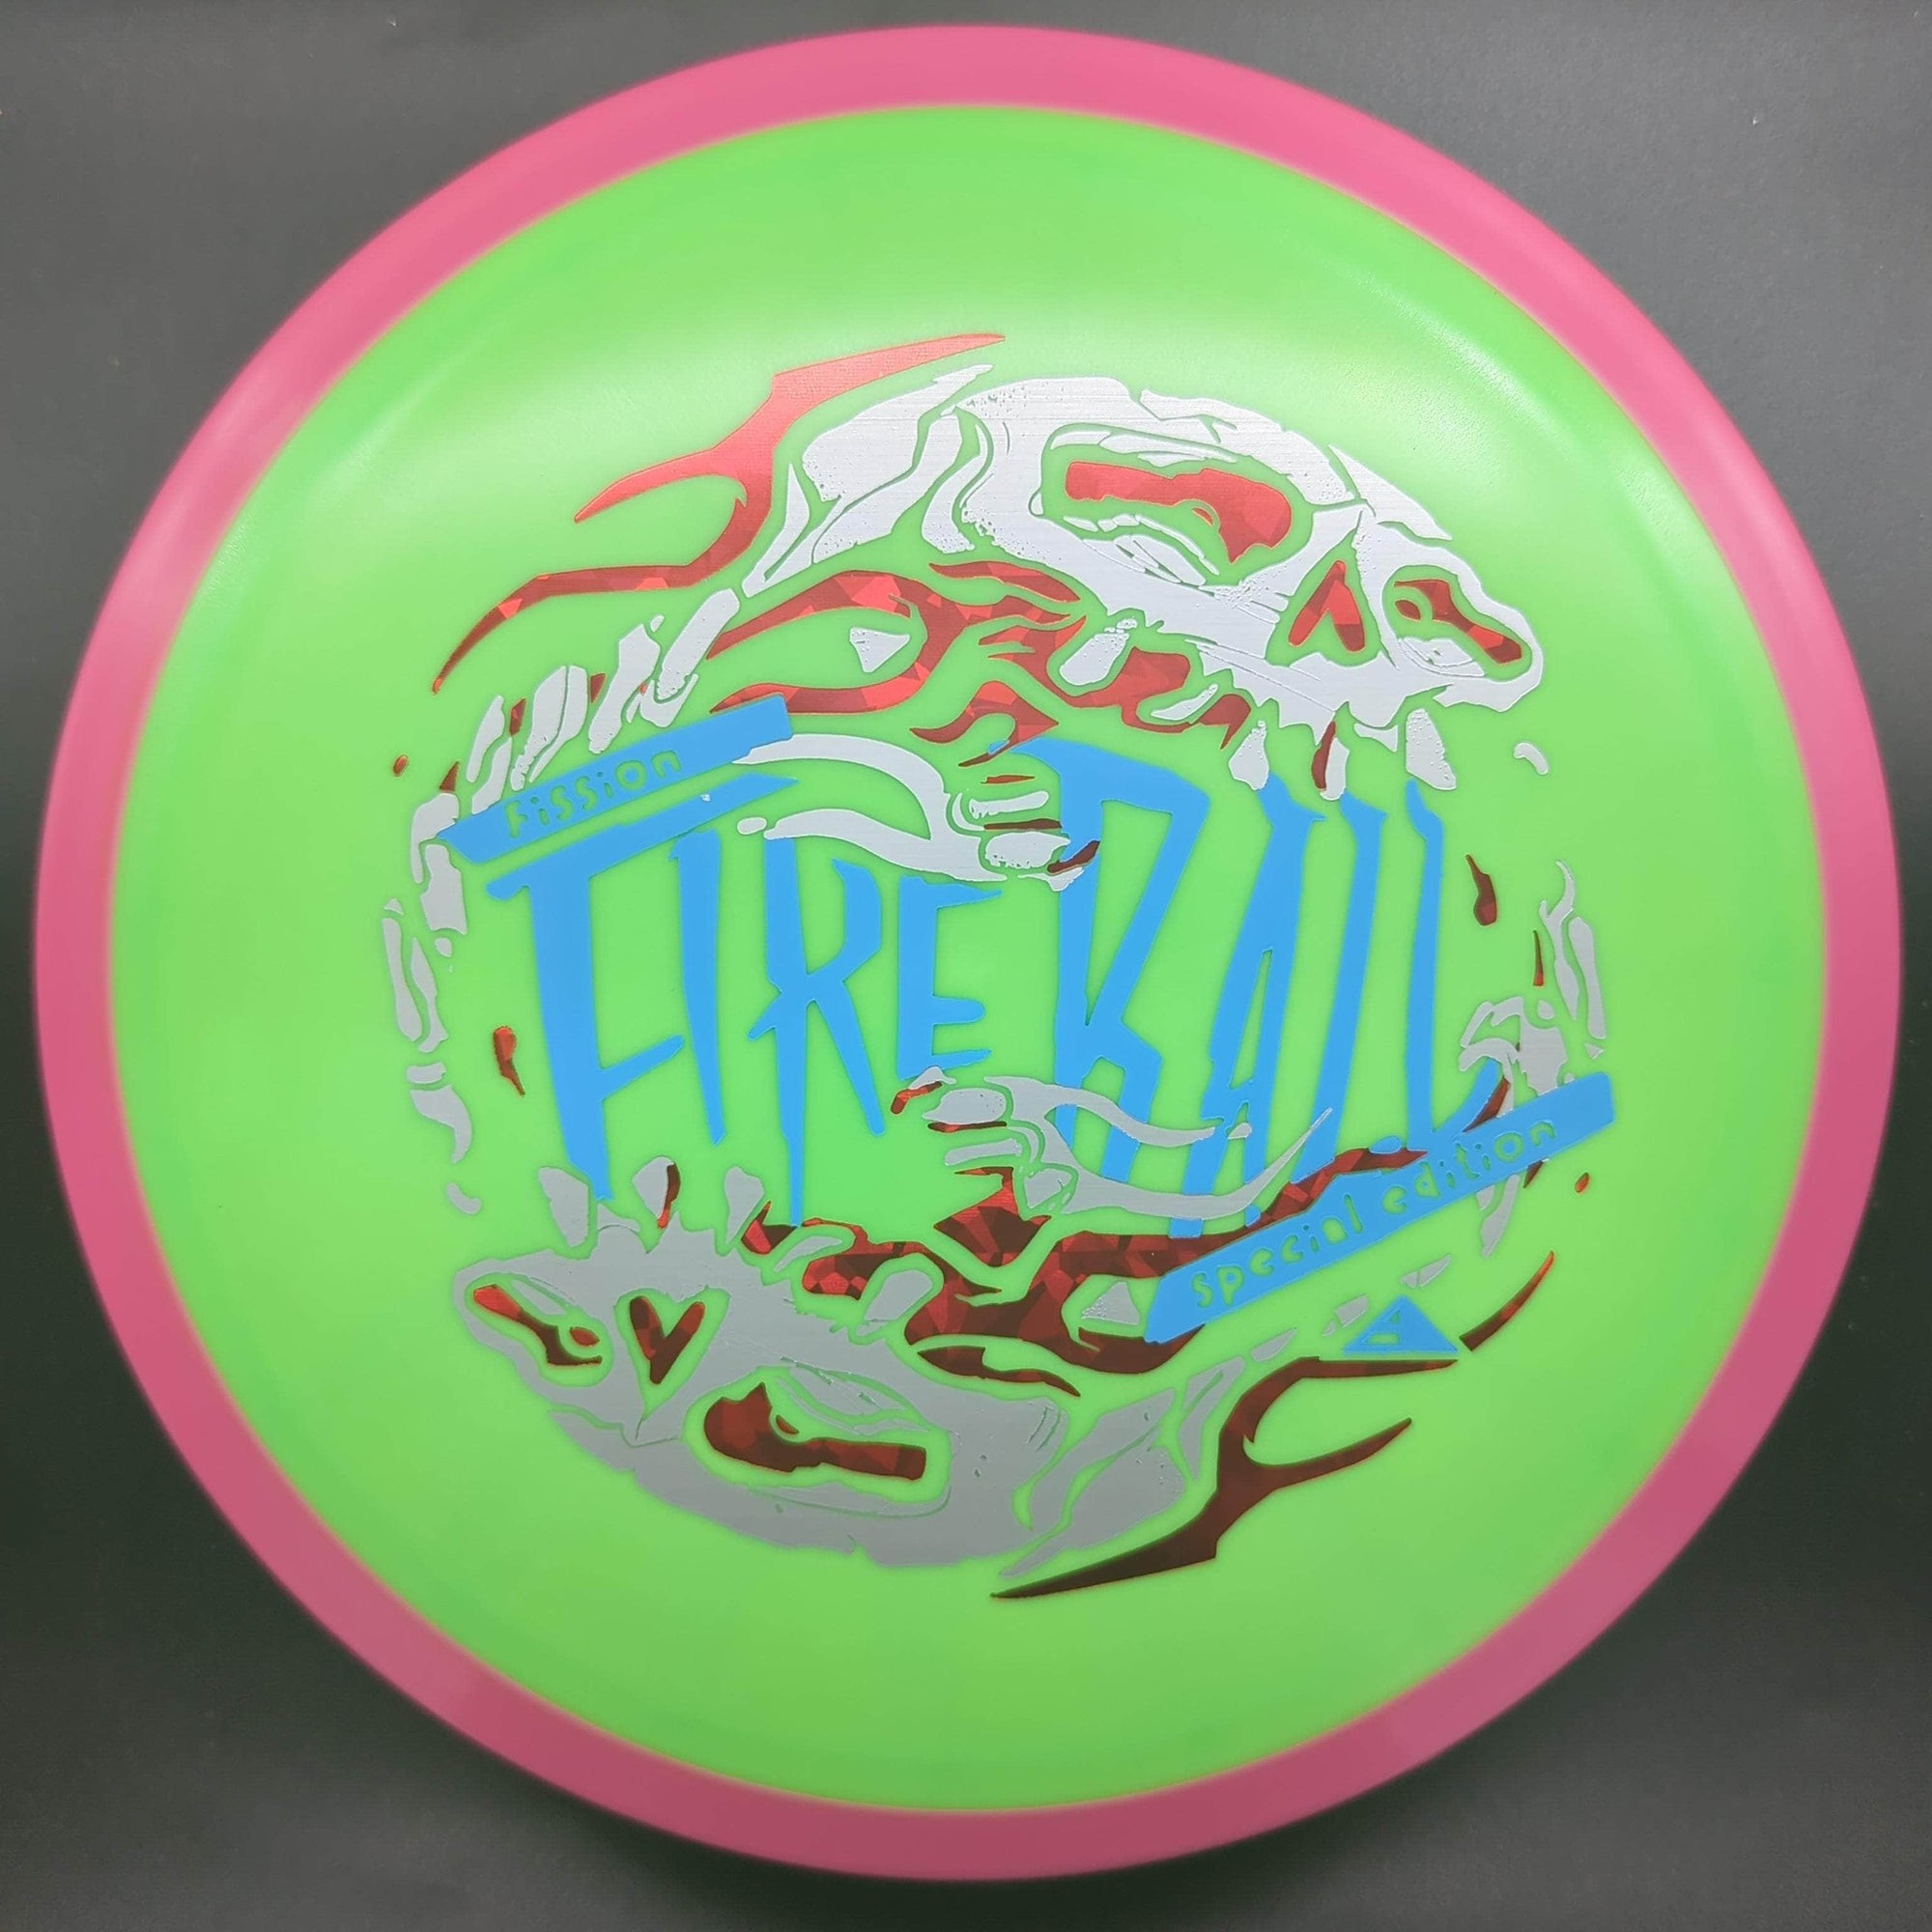 MVP Fairway Driver Pink Rim Green Plate Red/Silver/Blue Stamp 163g Fireball, Fission Plastic, Special Edition